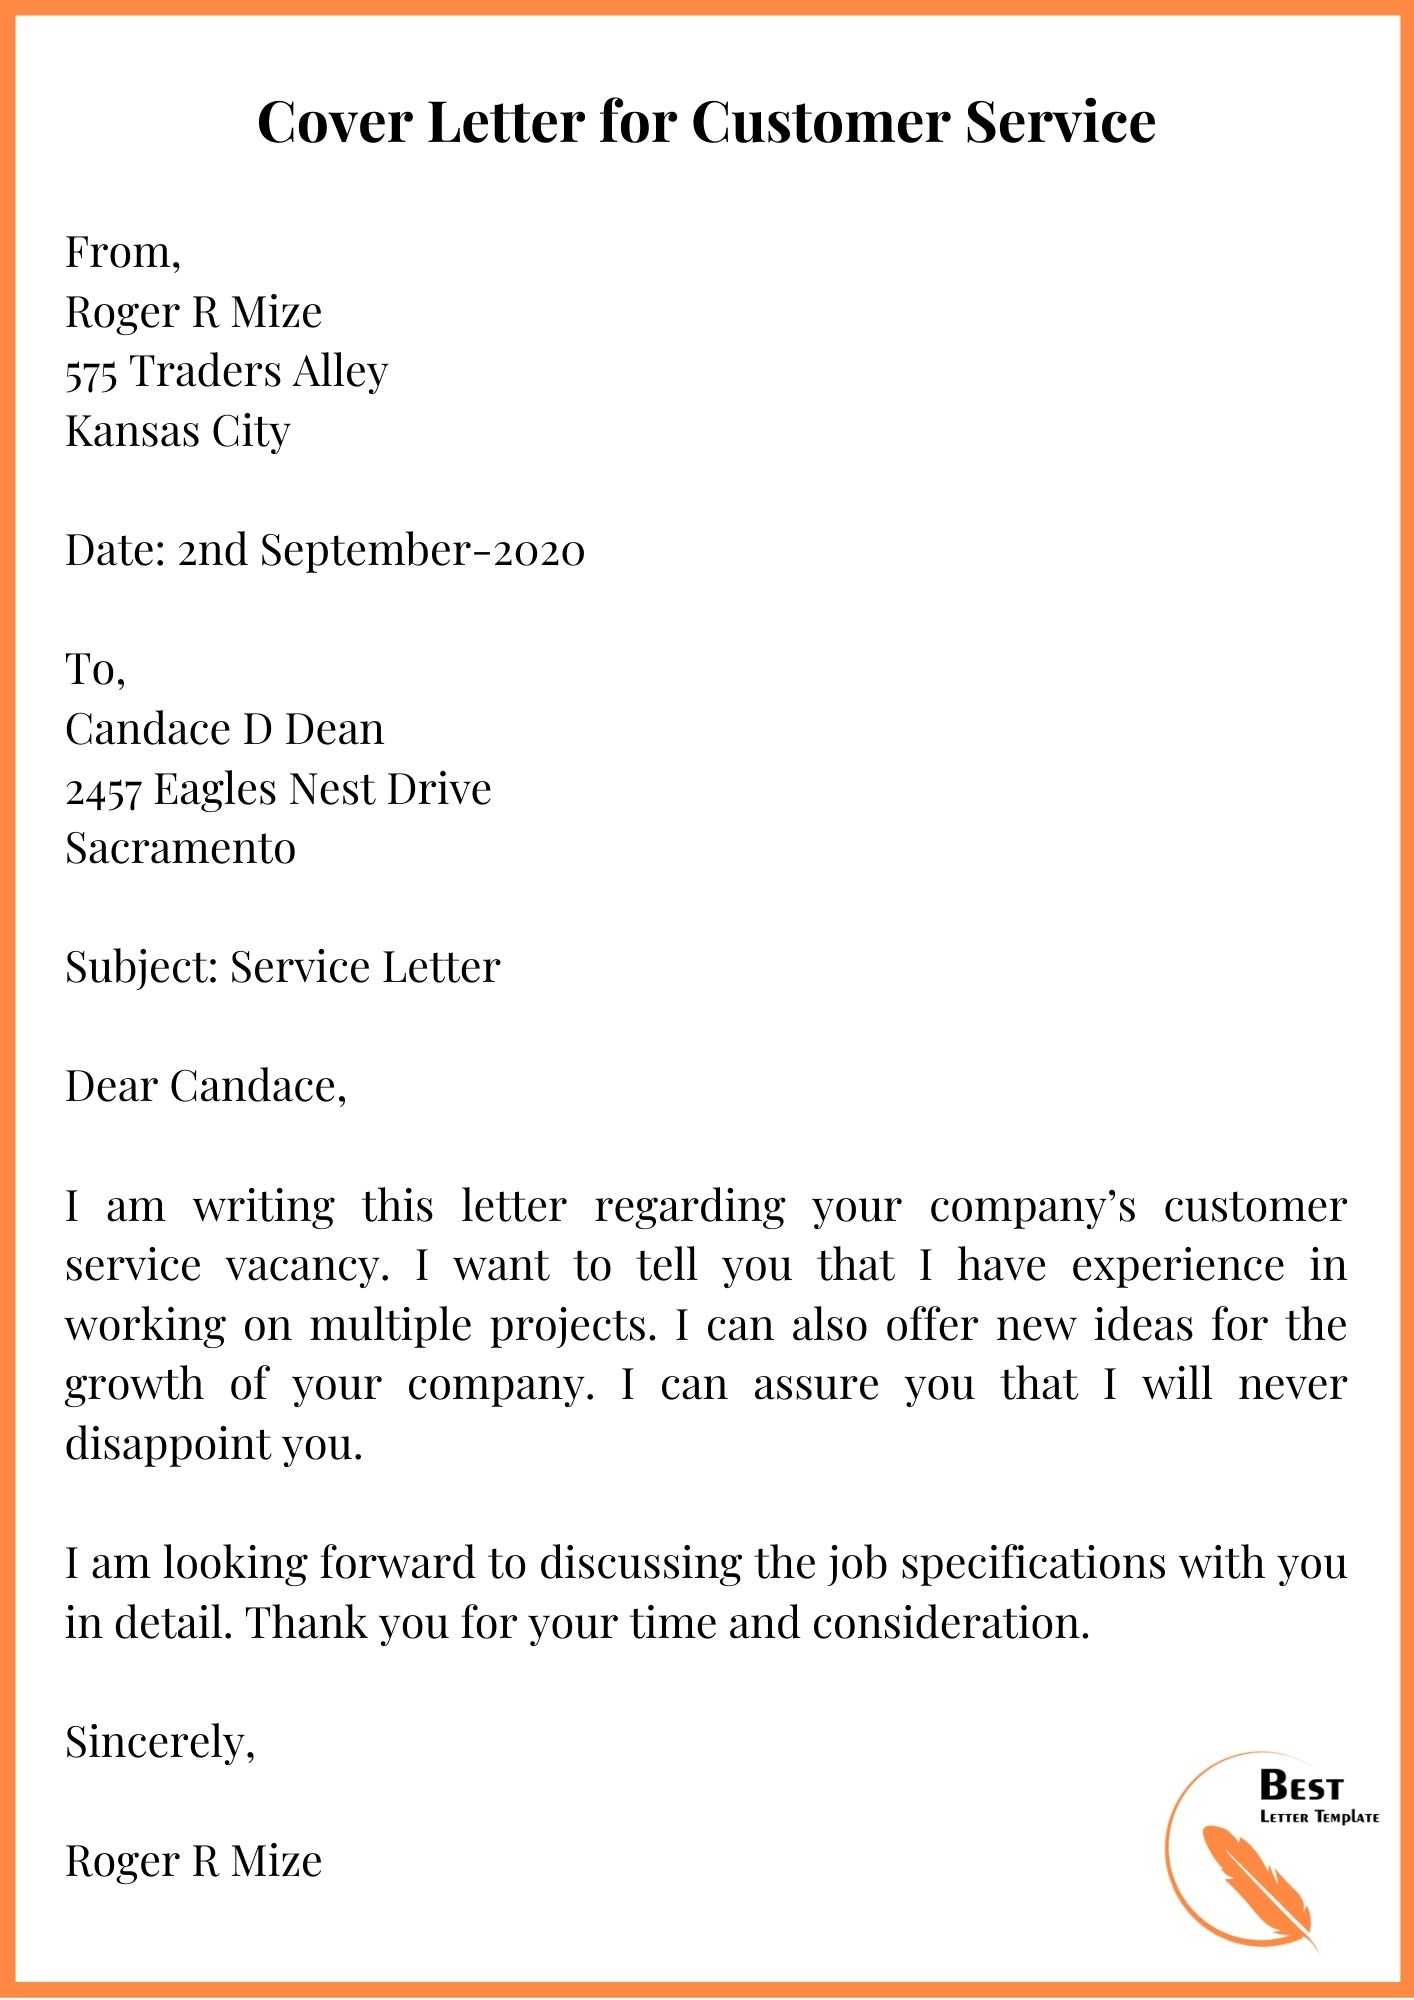 application letter as a customer service officer